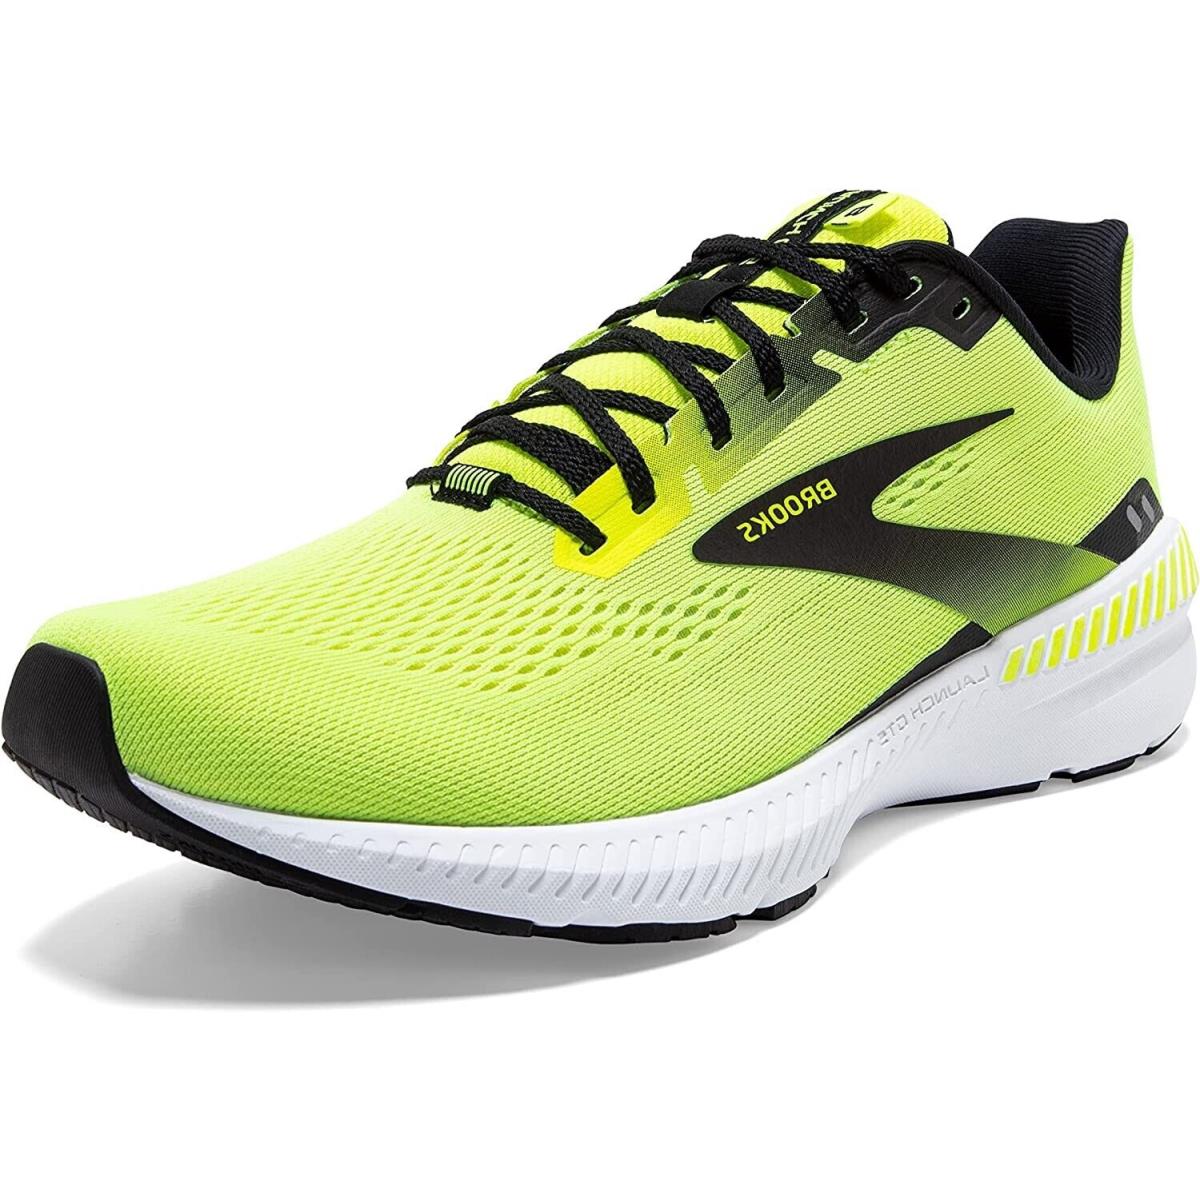 Brooks Launch Gts 8 Mens Running Shoes Athletic Yellow/black Sneakers US 9.5M - Black/Grey/Blue